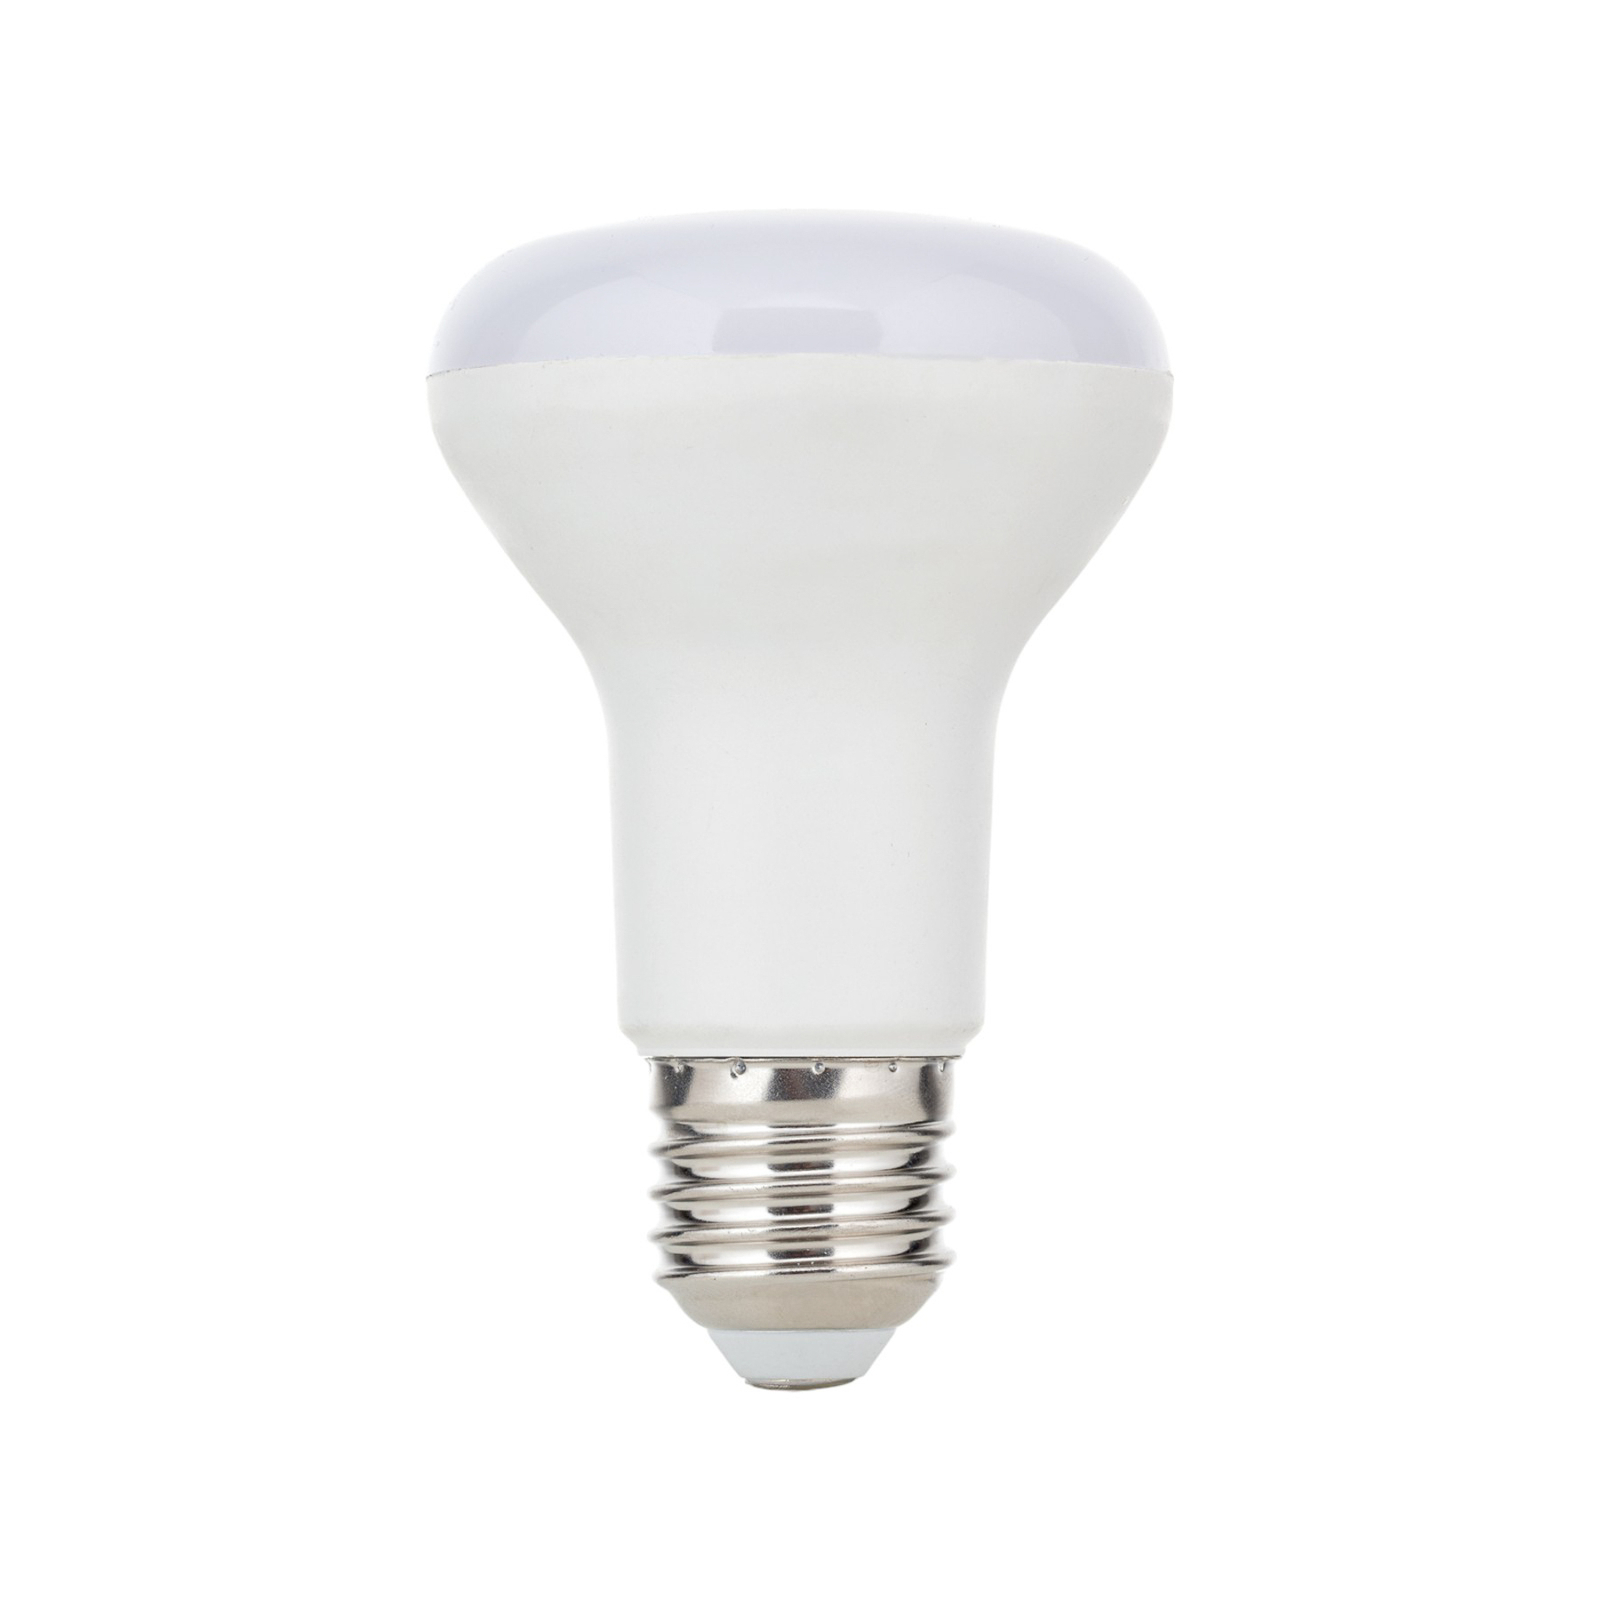 LED bulb reflector E27 R63 8W 3,000K 720lm dimmable